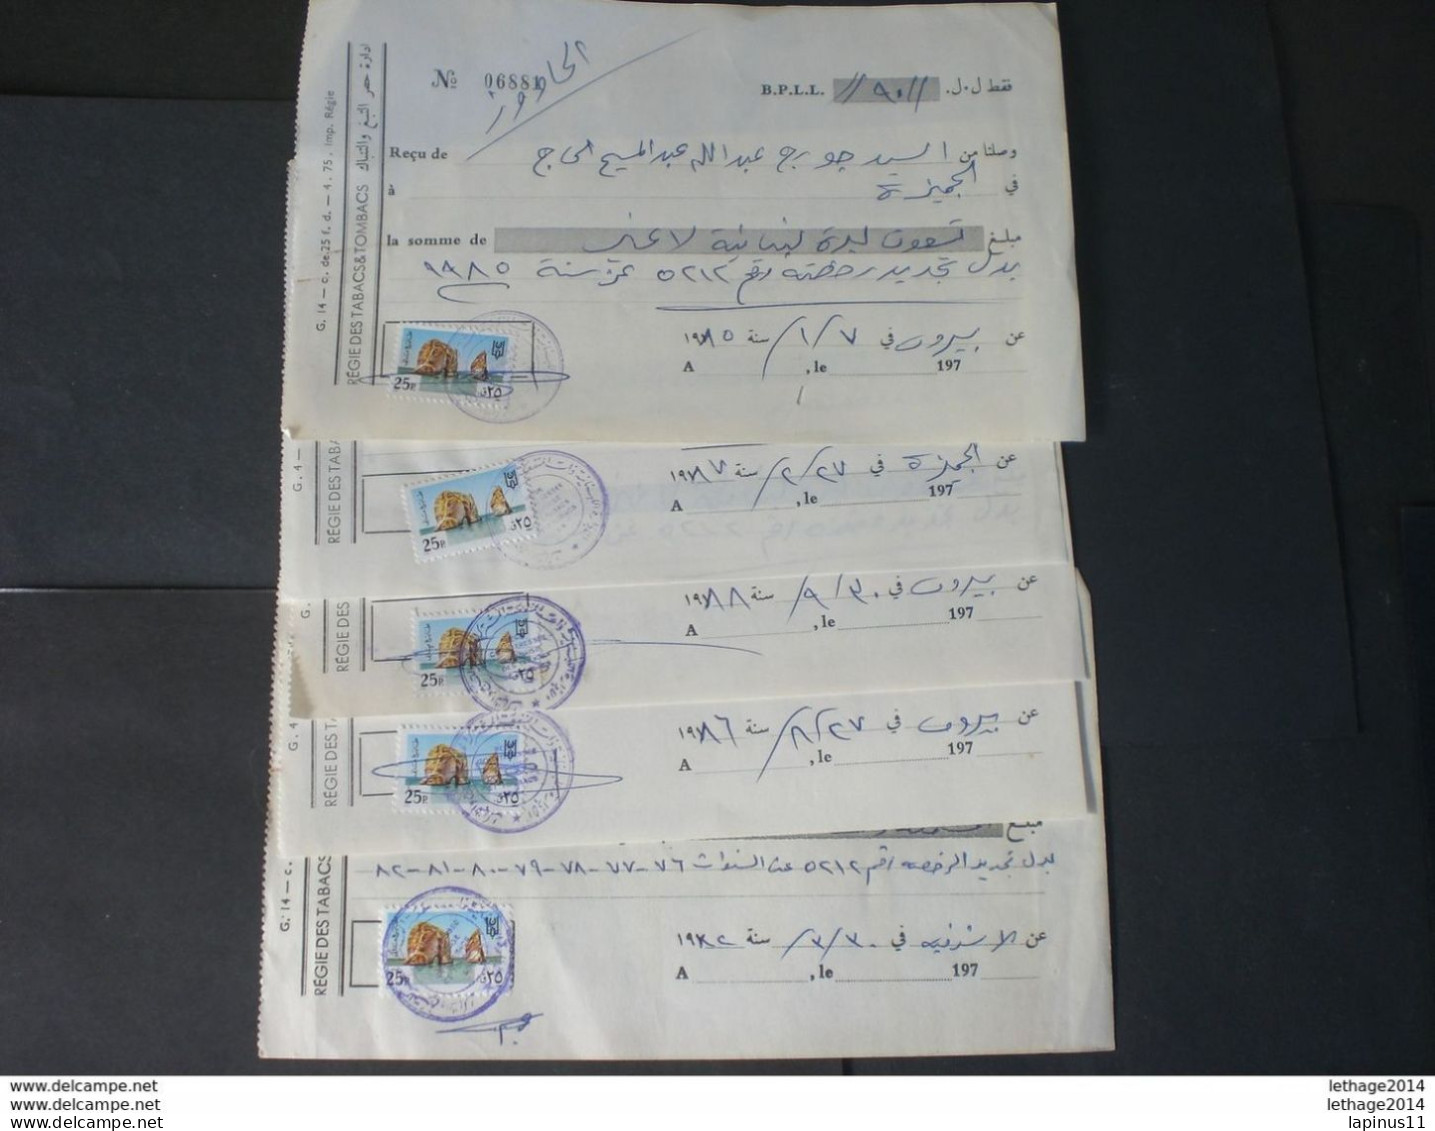 LEBANON لبنان GRAND LIBAN STAMPS TAXE TAX FISCAL REVENUE ORIGINAL NUMBER 88 DOCUMENT + 7 PHOTO - Lebanon